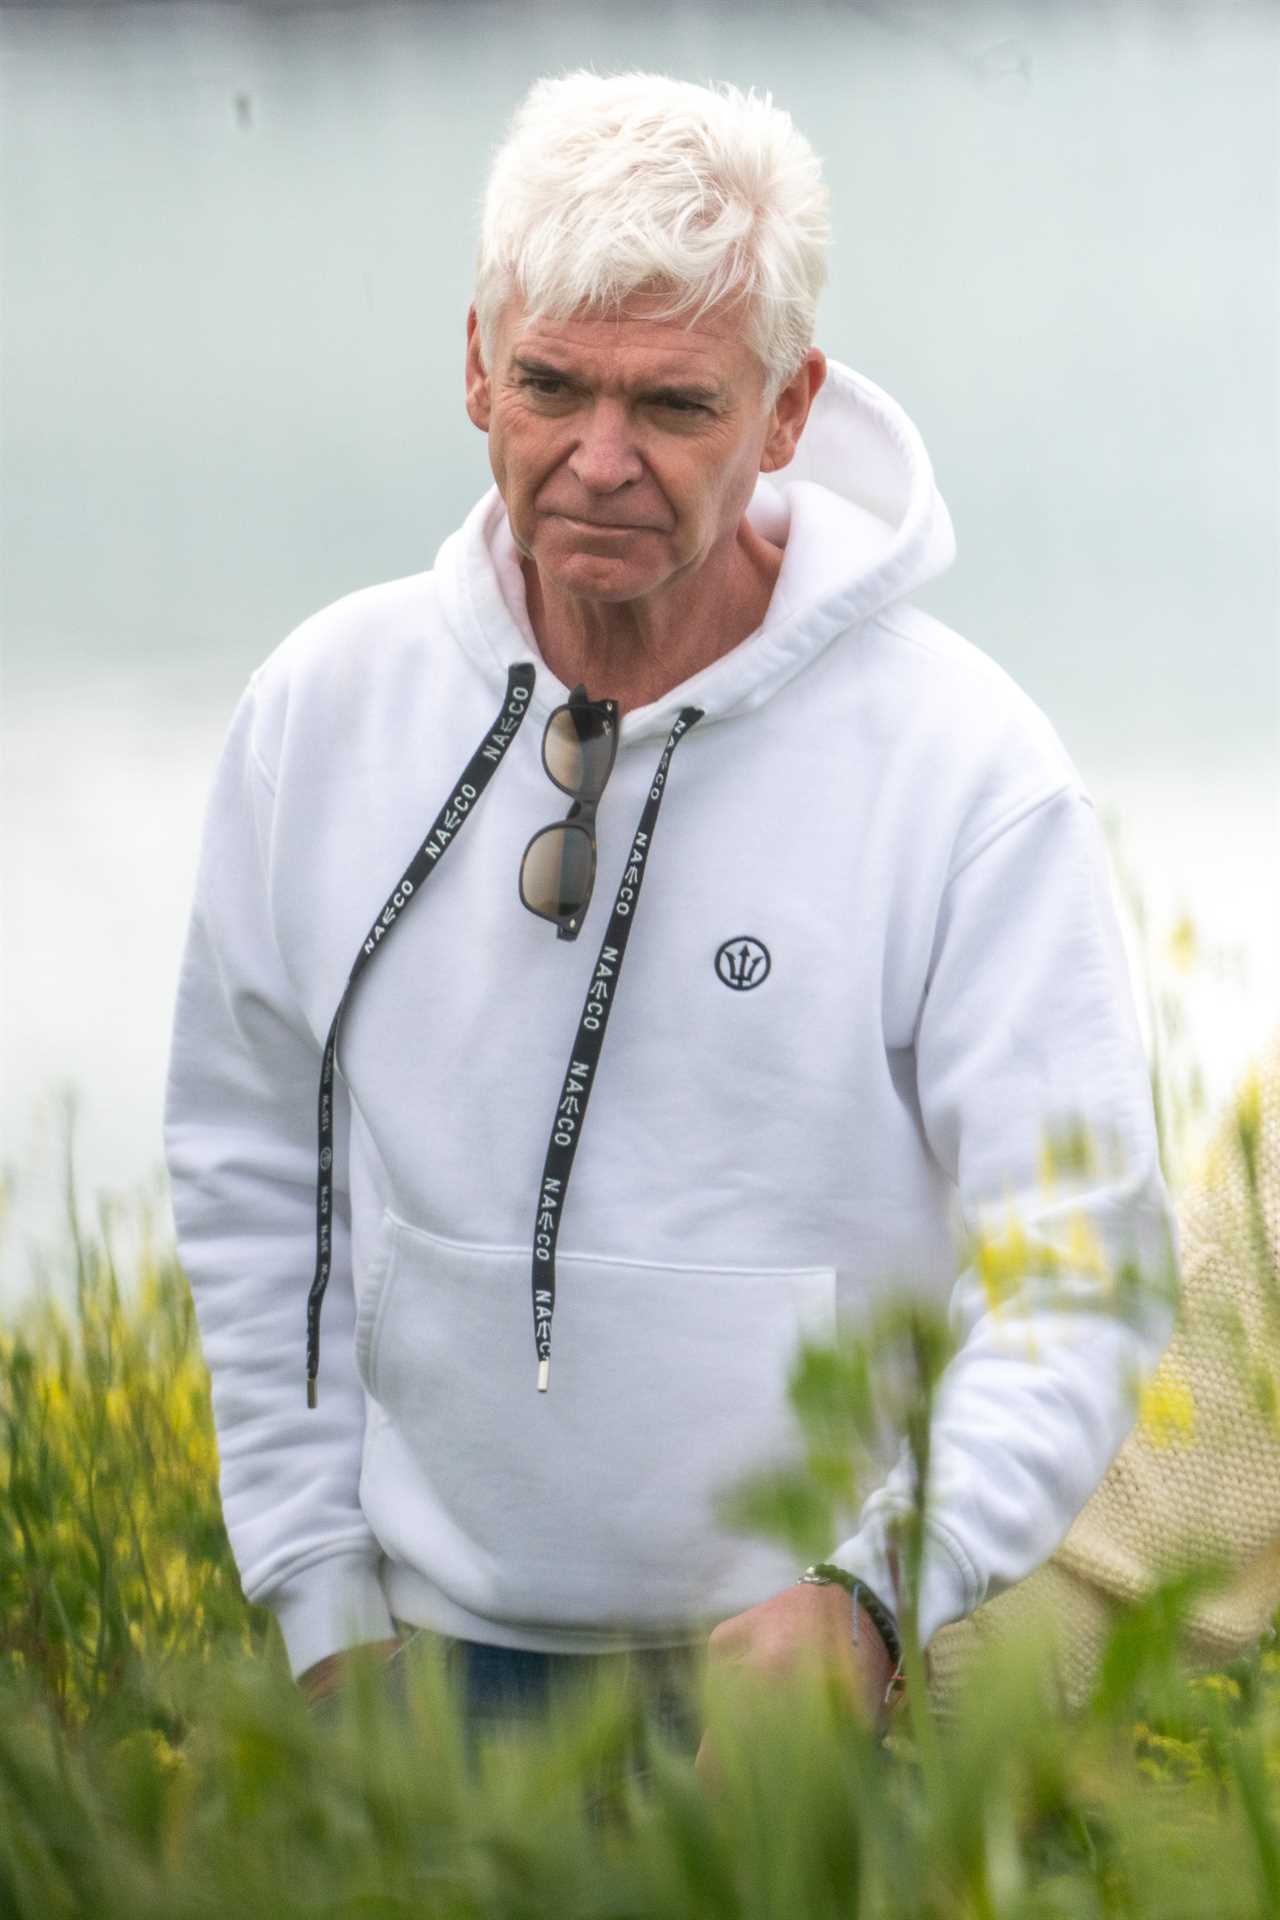 EXCLUSIVE: Phillip Schofield shares emotional walk with mum Pat today in the West Country as his brother Timothy is jailed for 12 years over sexual acts with a minor. ..The pair hugged and also laughed as they strolled in the sunshine, stopping for an embrace on a bench before sharing happy moments along the coastal path. Pat, 85, will be 91 before Timothy is eligible for parole.....Pictured: Phillip Schofield..Ref: SPL6856491 190523 EXCLUSIVE..Picture by: Spartacus / SplashNews.com....Splash News and Pictures..USA: 310-525-5808.UK: 020 8126 1009..eamteam@shutterstock.com....World Rights..